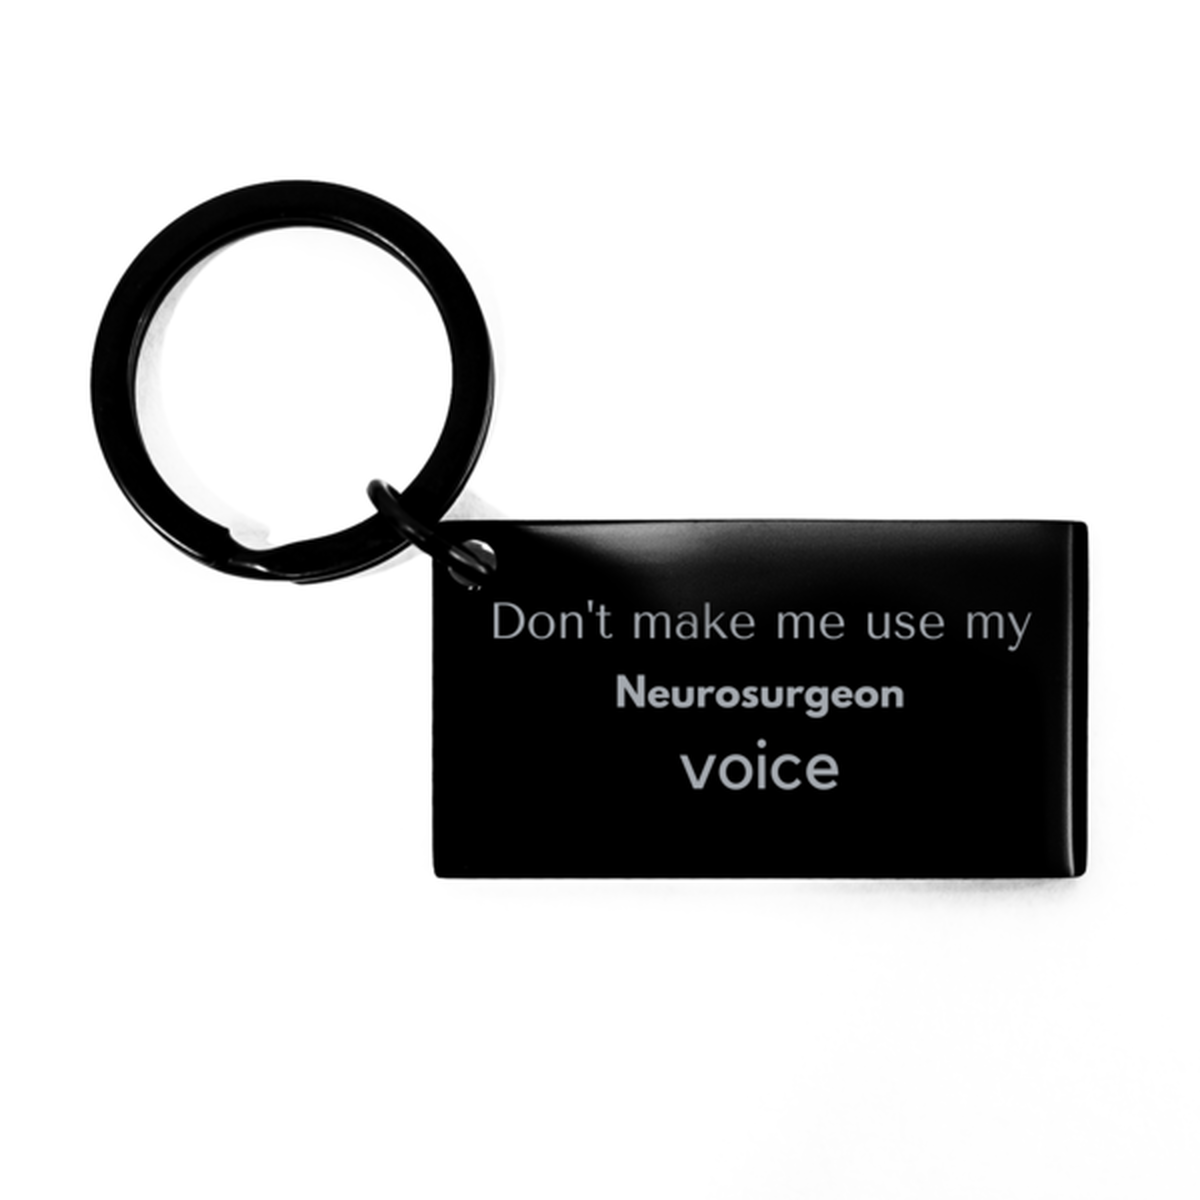 Don't make me use my Neurosurgeon voice, Sarcasm Neurosurgeon Gifts, Christmas Neurosurgeon Keychain Birthday Unique Gifts For Neurosurgeon Coworkers, Men, Women, Colleague, Friends